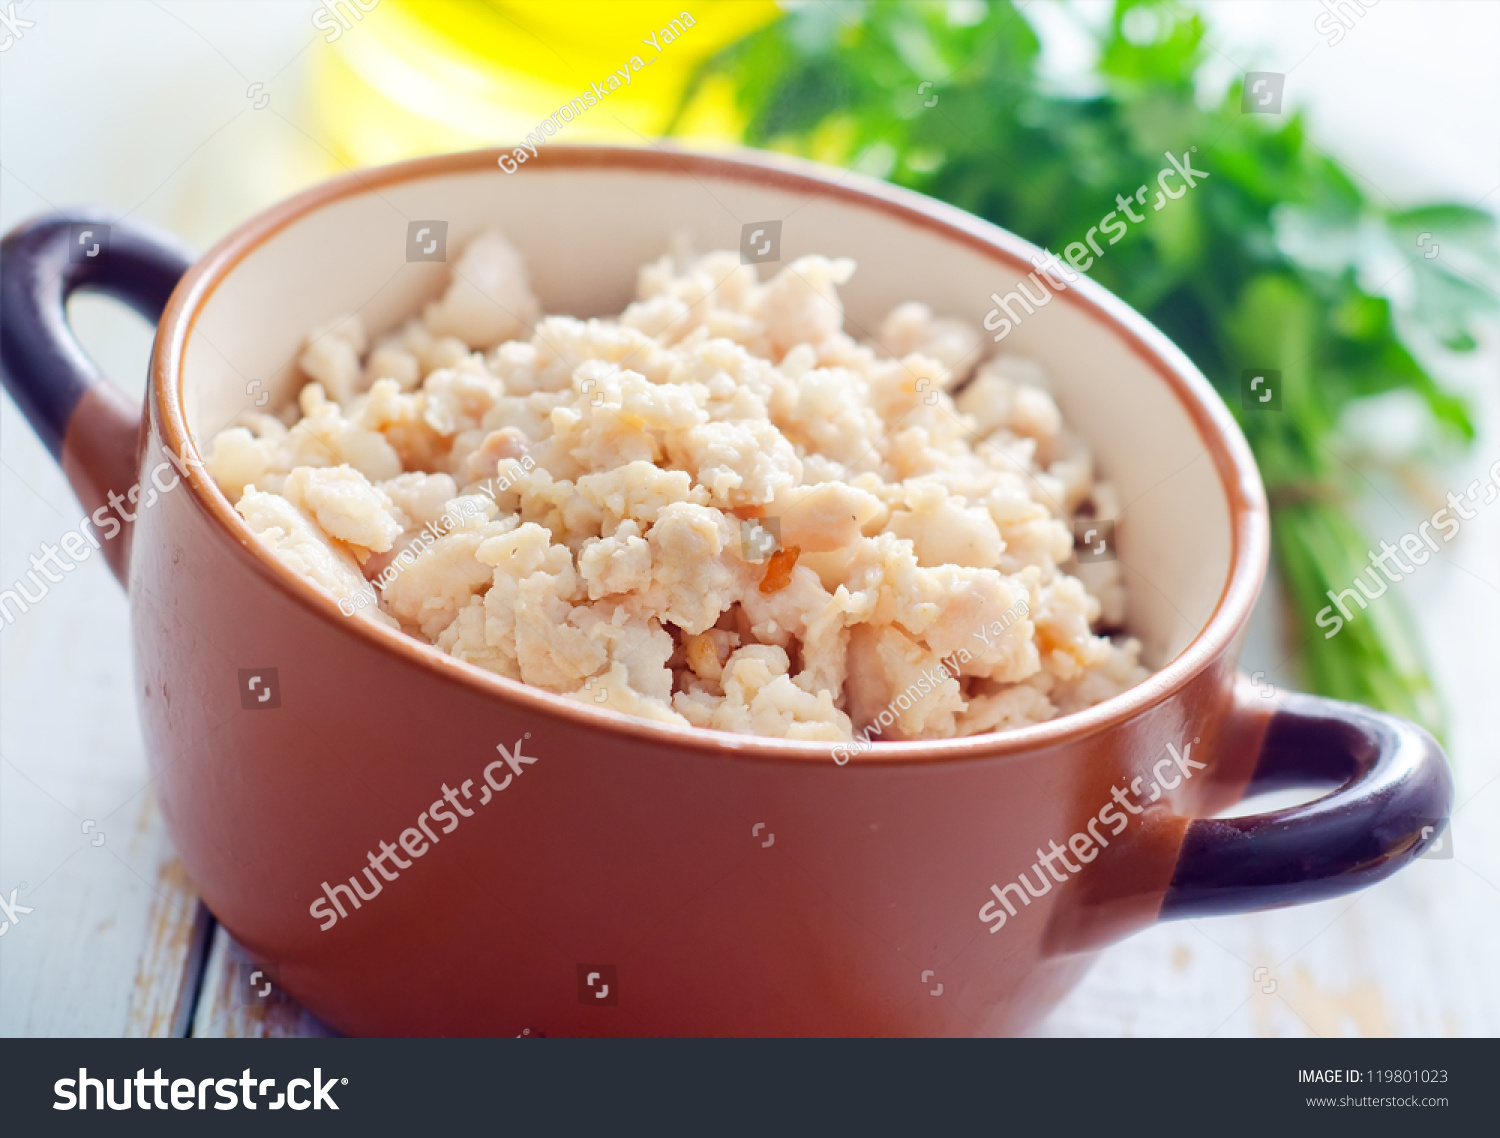 Minced meat #119801023